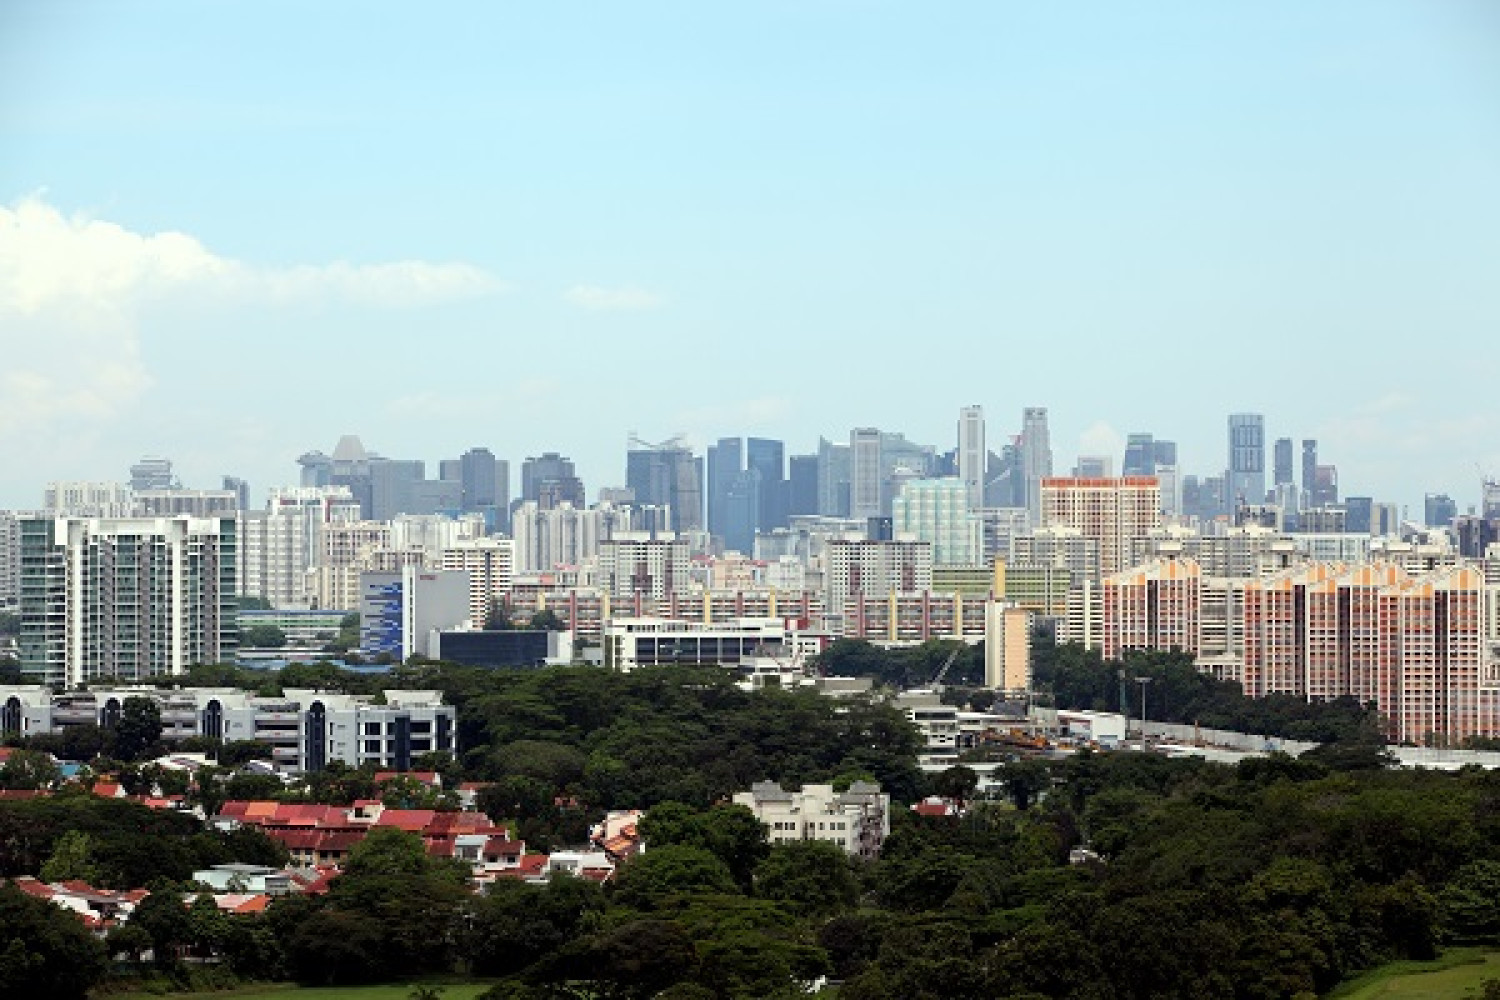 Developers sold 1,296 private residential homes in March: URA - Property News